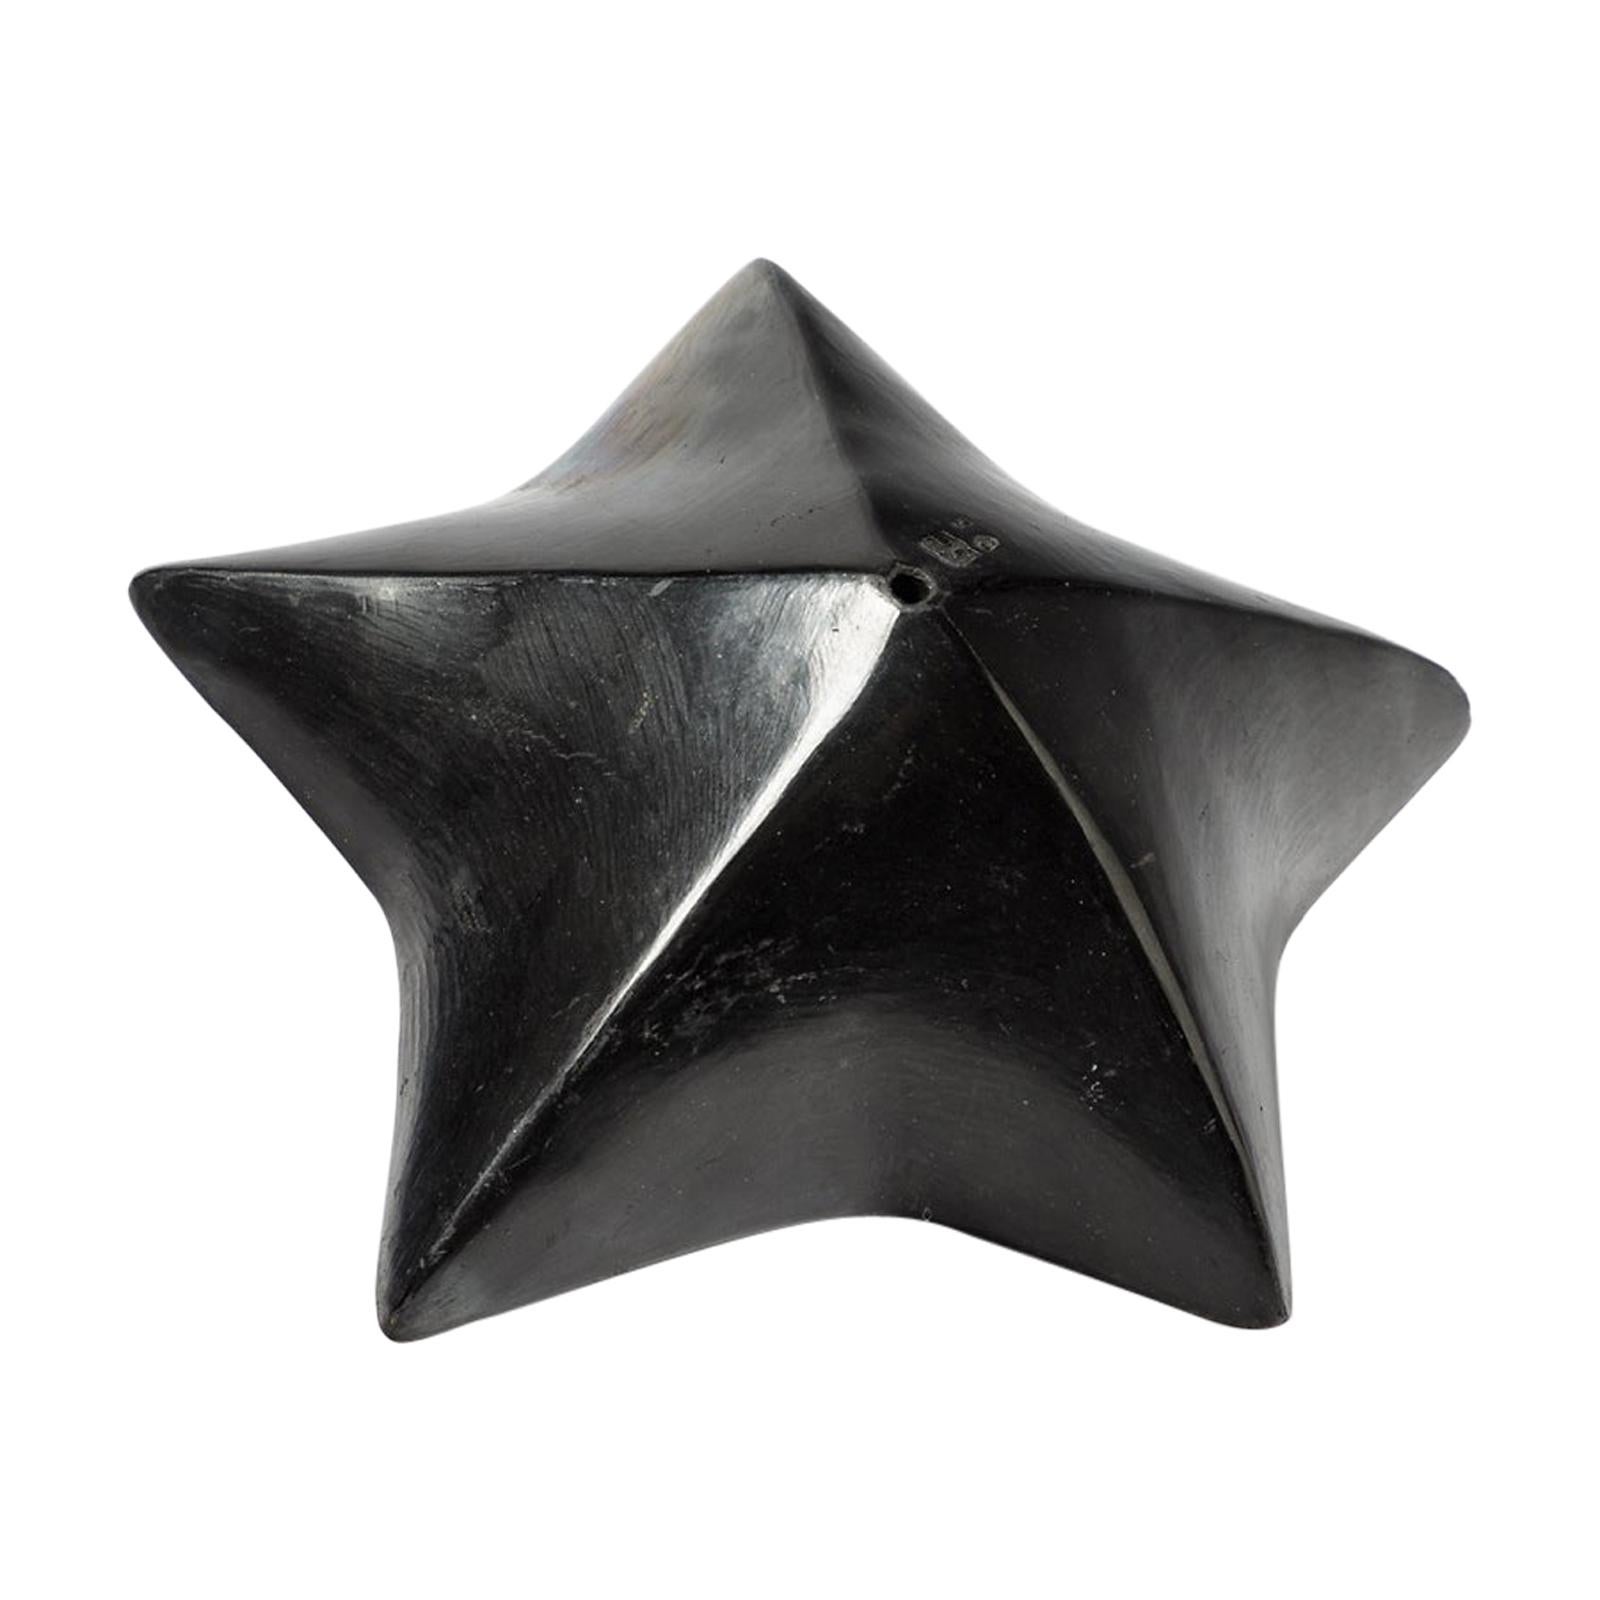 Black Star Ceramic Sculpture by Nadia Pasquer French Mid Century Design